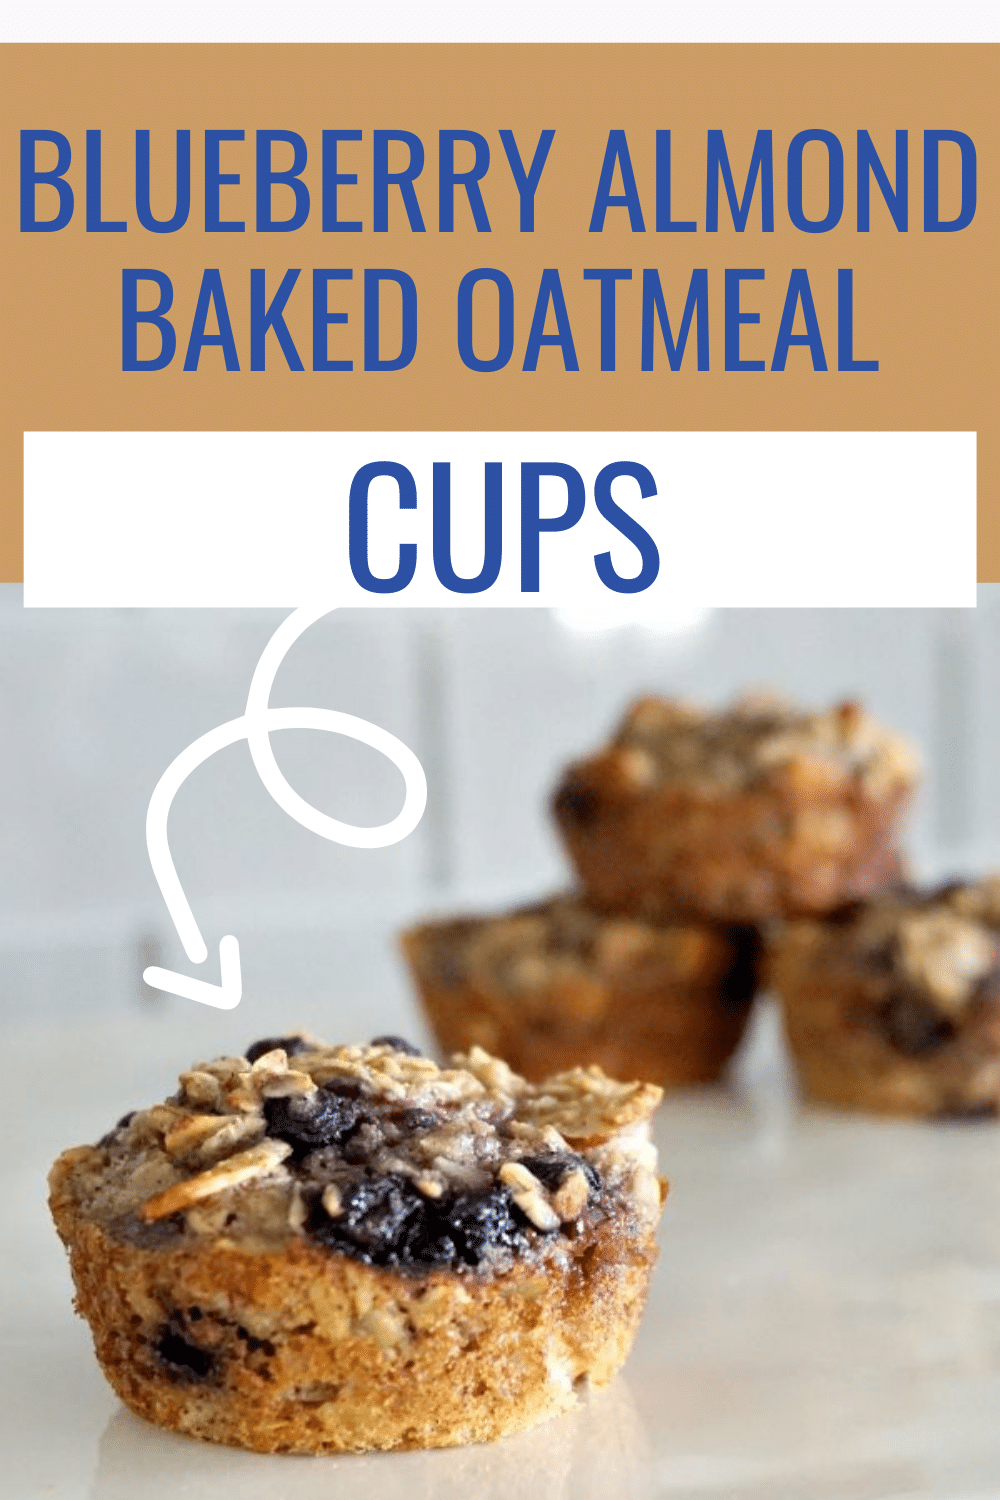 Blueberry Almond Baked Oatmeal Cups are easy to make and freeze well too. This is a great breakfast or snack idea full of fresh fruit and oats! #oatmeal #breakast #blueberry via @wondermomwannab